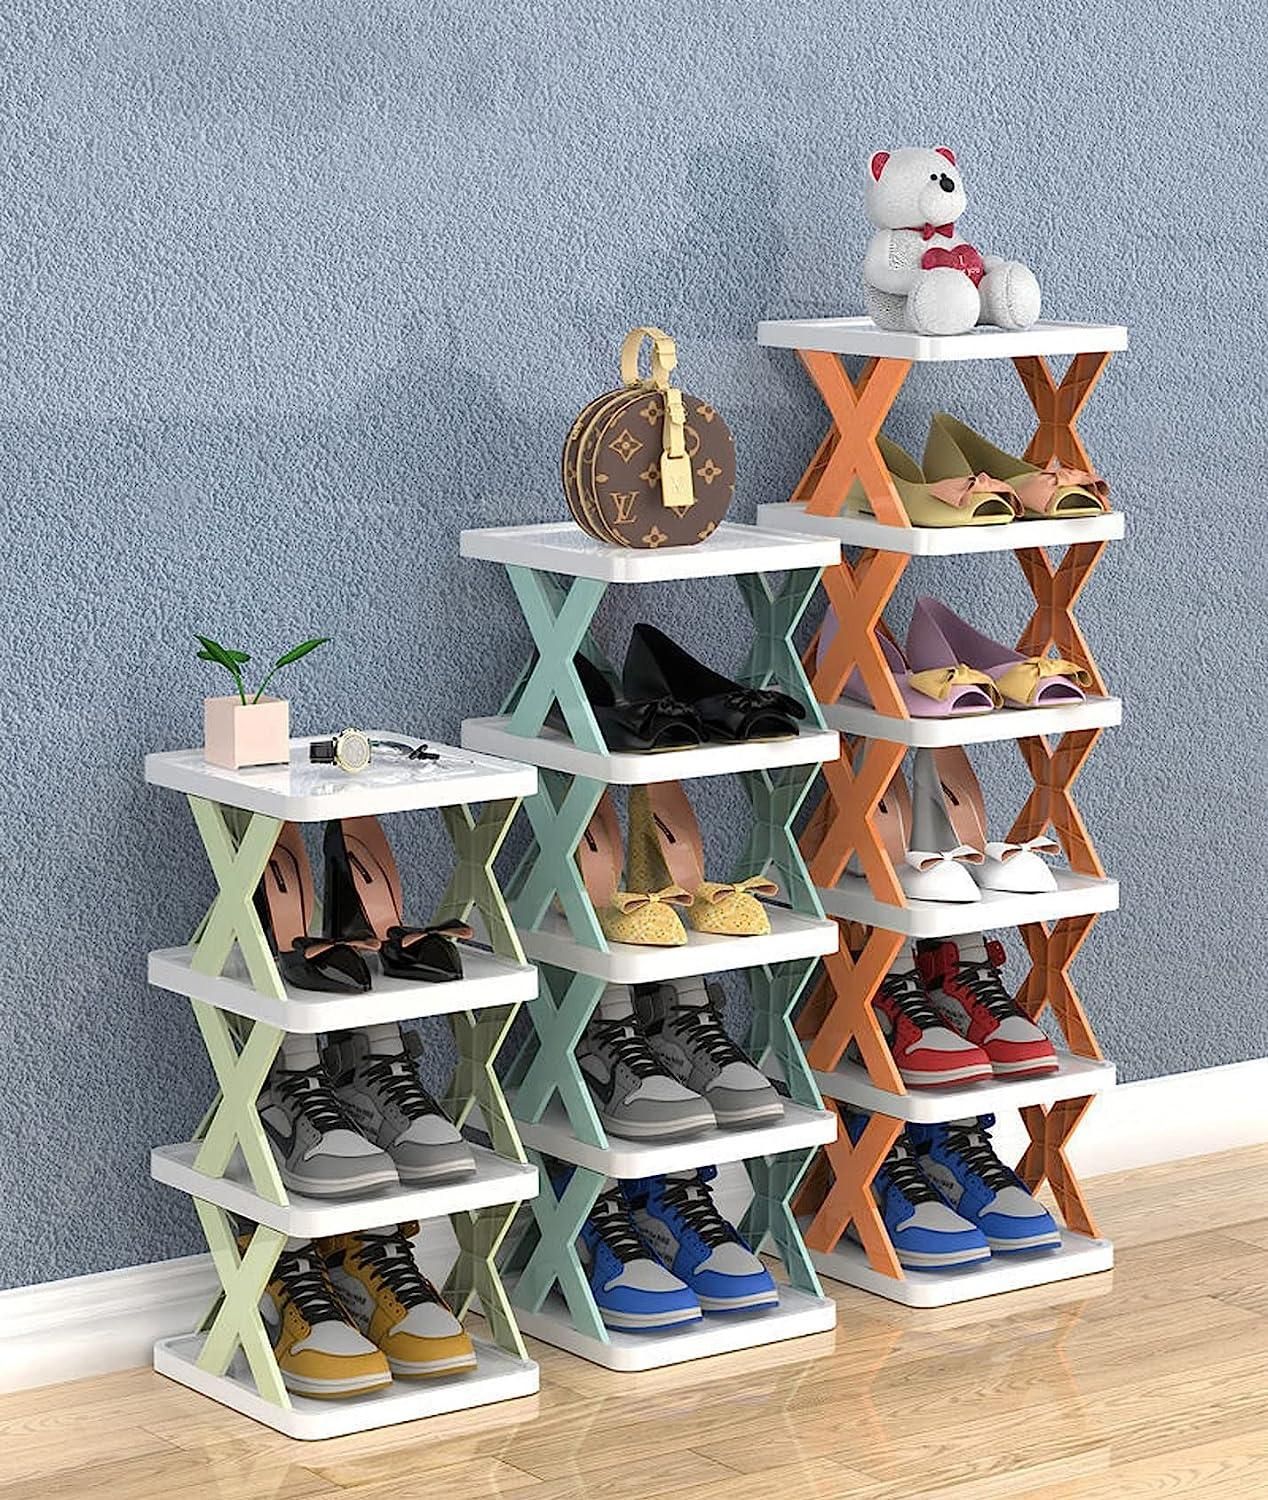 Stacksole 0.6 - SHOES STORAGE ORGANIZER WITH 6 LAYERS